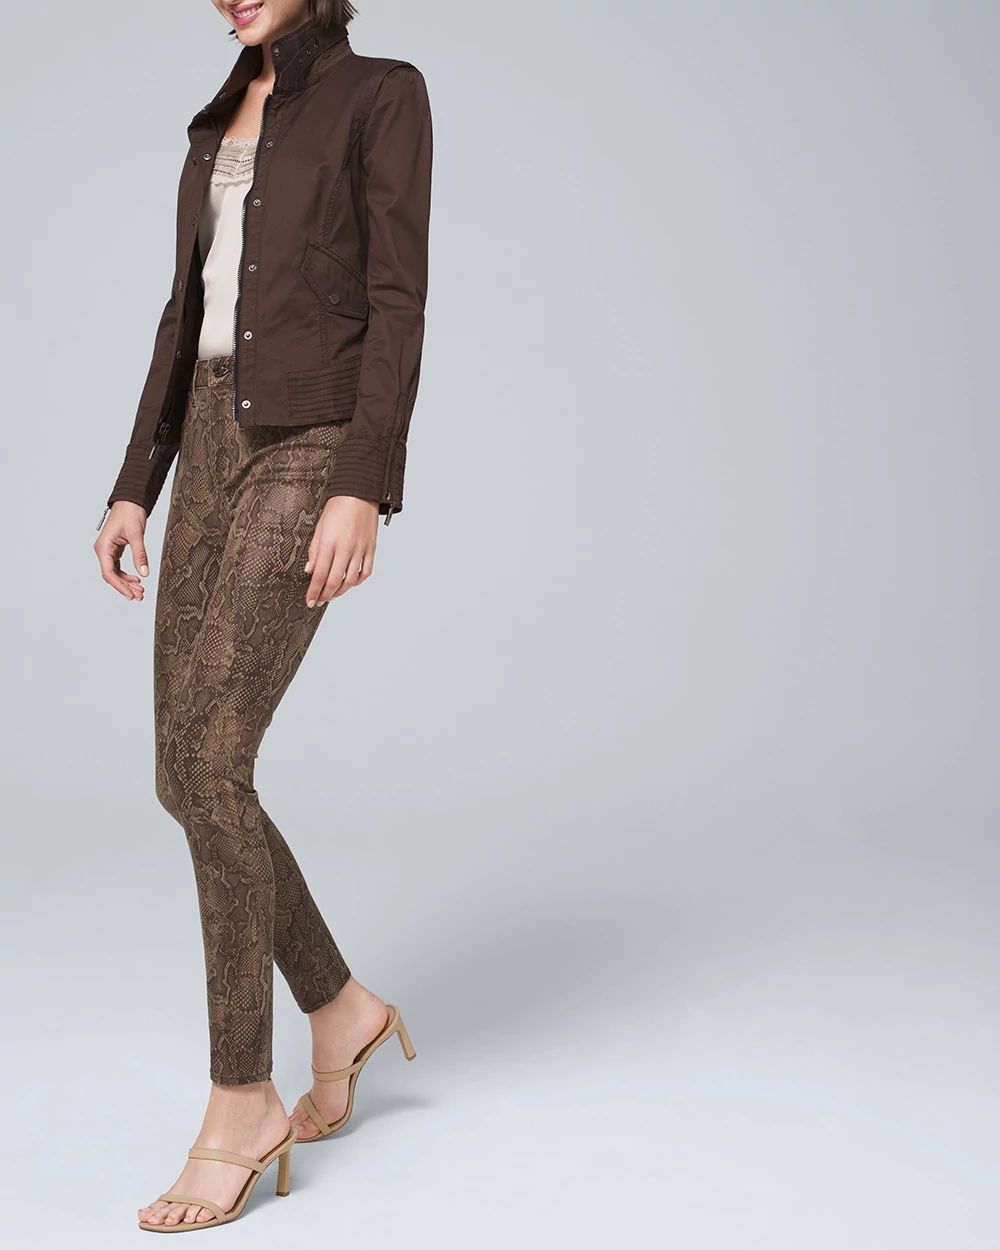 Petite High-Rise Snake-Print Skinny Jeans click to view larger image.